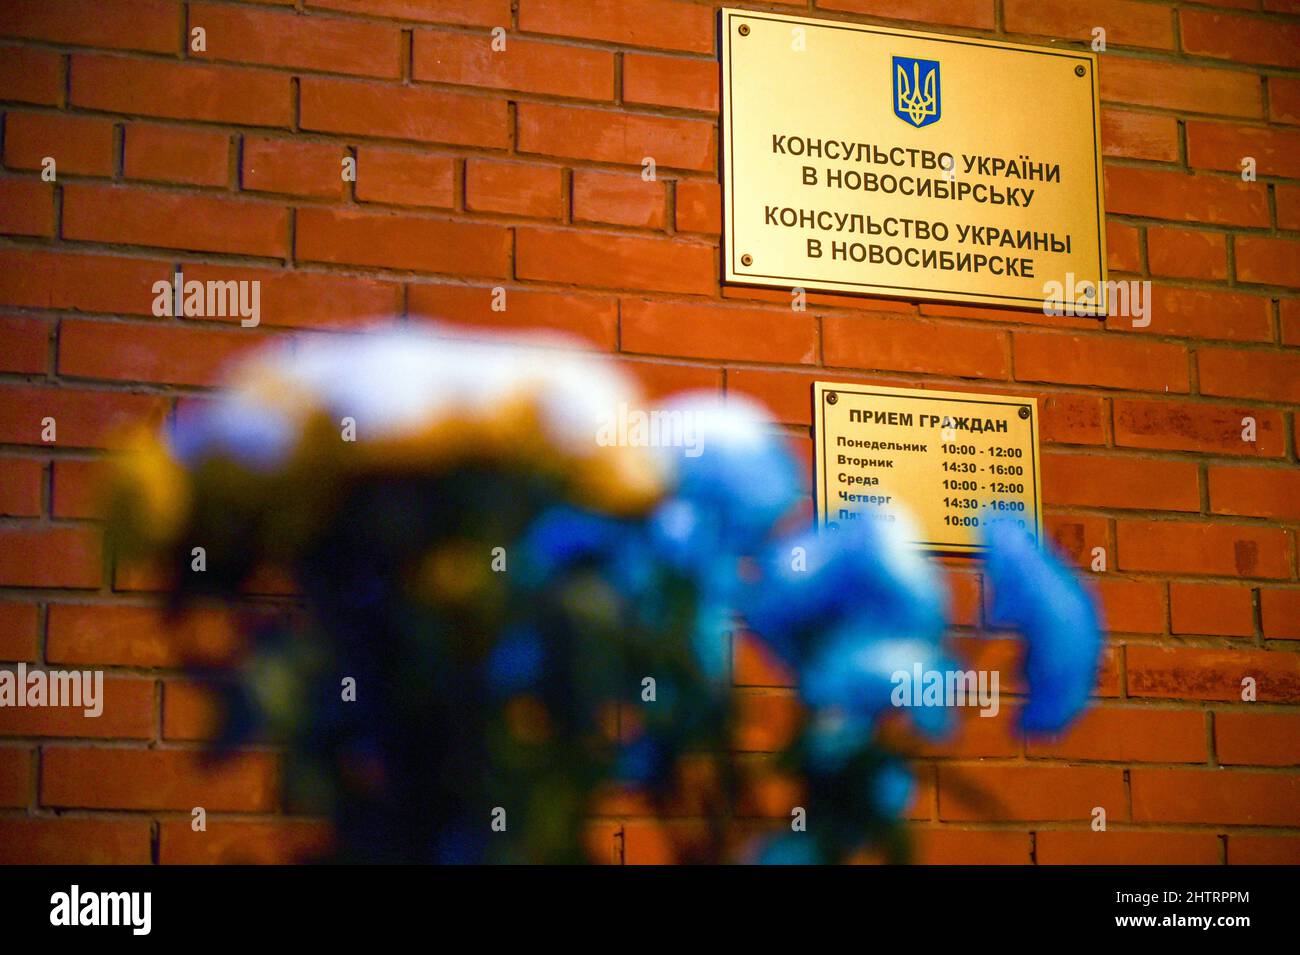 Genre photography. Continuation of the uncoordinated protest action against the special military operation of the Russian Armed Forces in Ukraine. People bring flowers to the closed Consulate of Ukraine in Novosibirsk. 02.03.2022 Russia, Novosibirsk region, Novosibirsk Photo credit: Vlad Nekrasov/Kommersant/Sipa USA Stock Photo